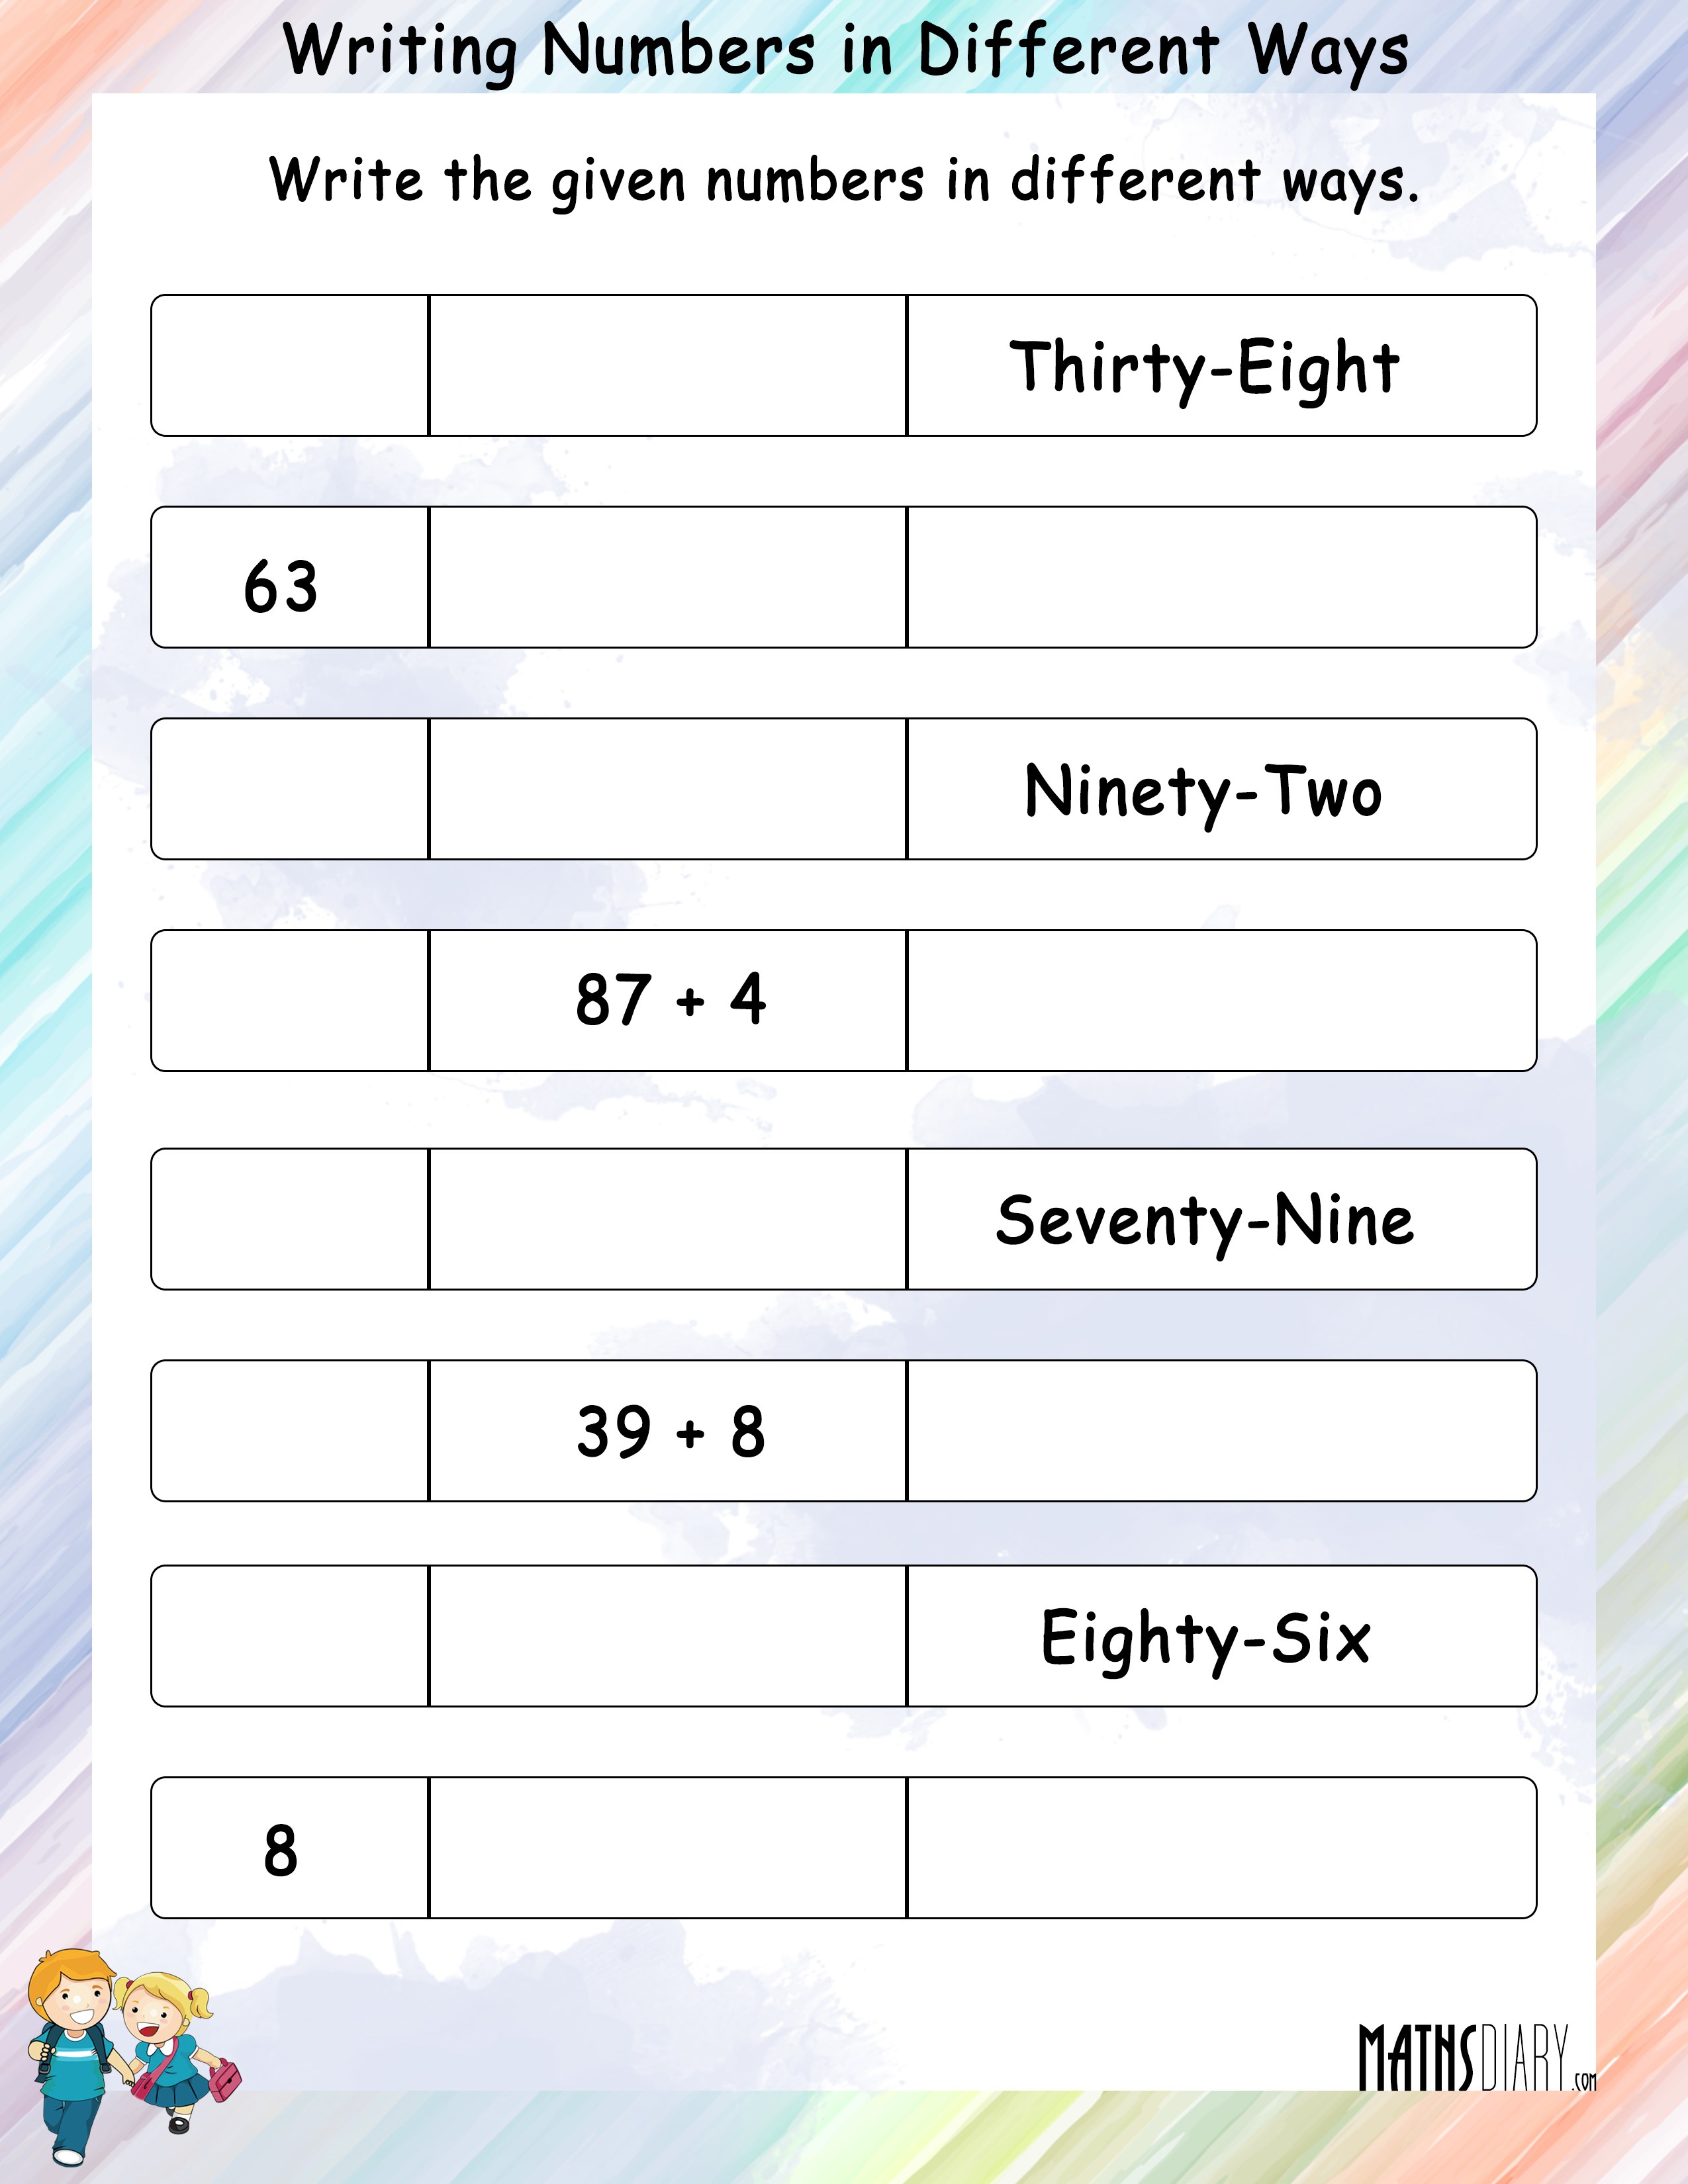 Writing Numbers In Different Ways Games Printable